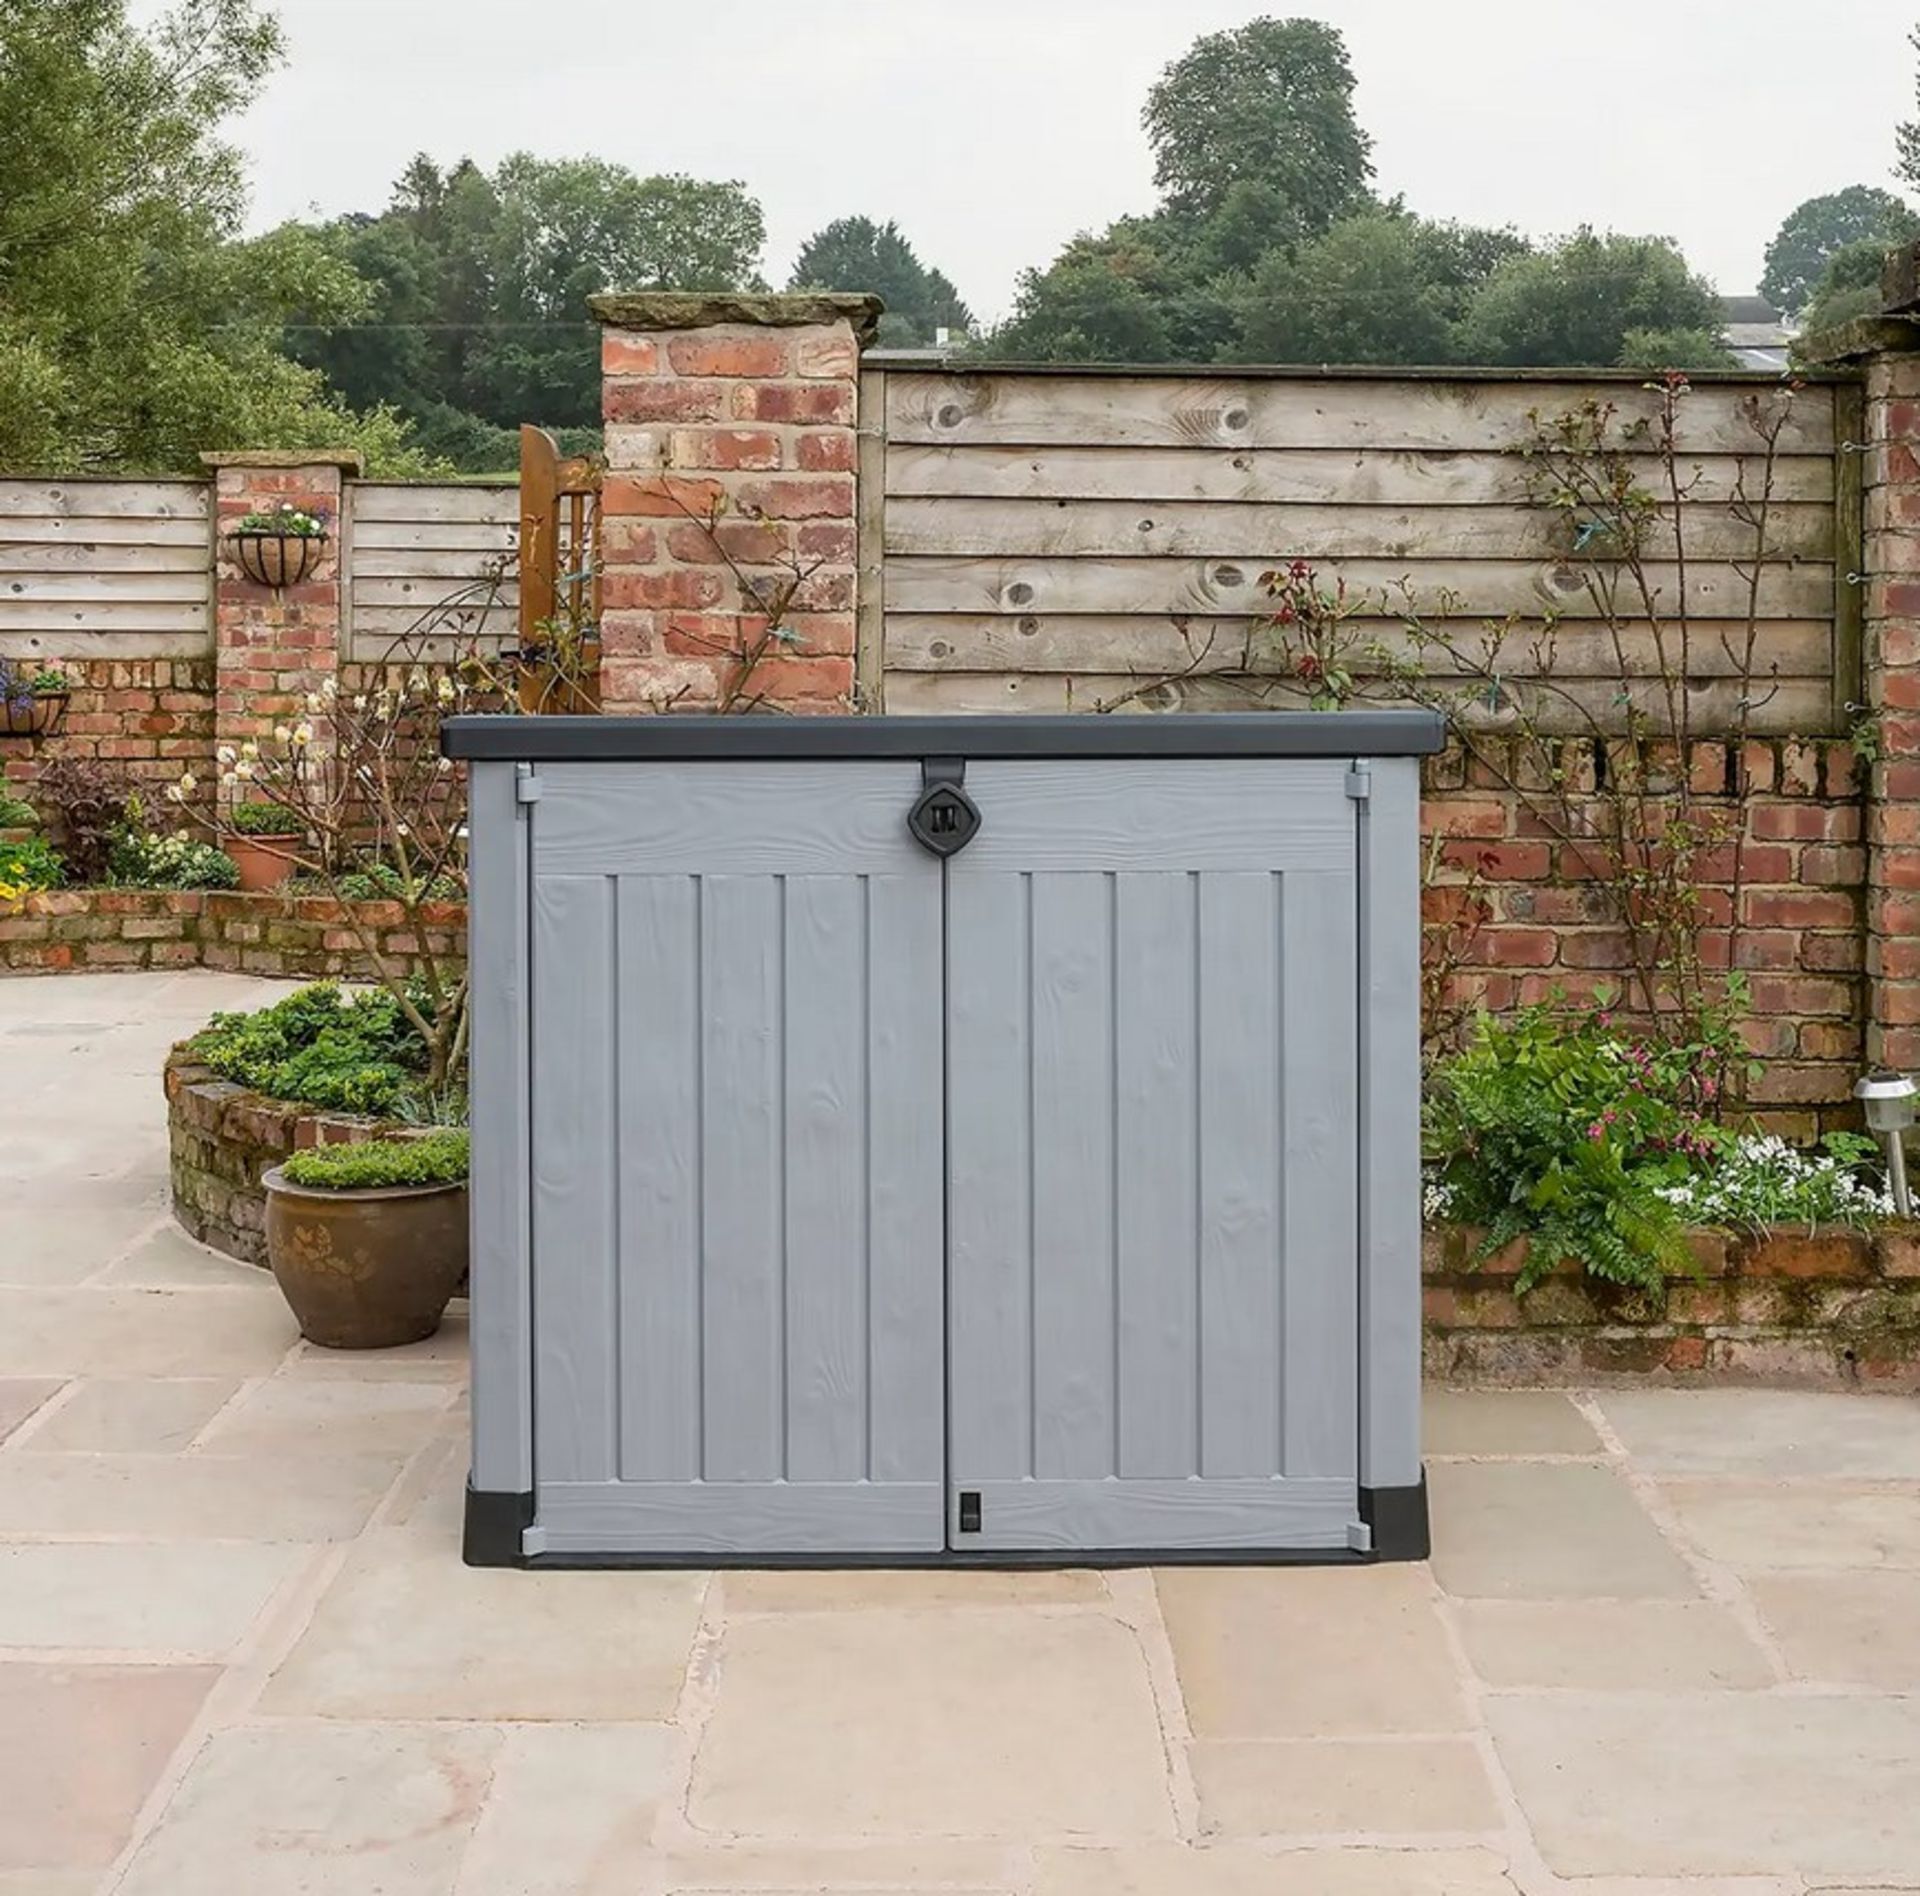 (39/Mez/P9) RRP £190. Keter Store It Out Ace Grey/Black Outdoor Garden Shed. 1200L Capacity. Eleg...